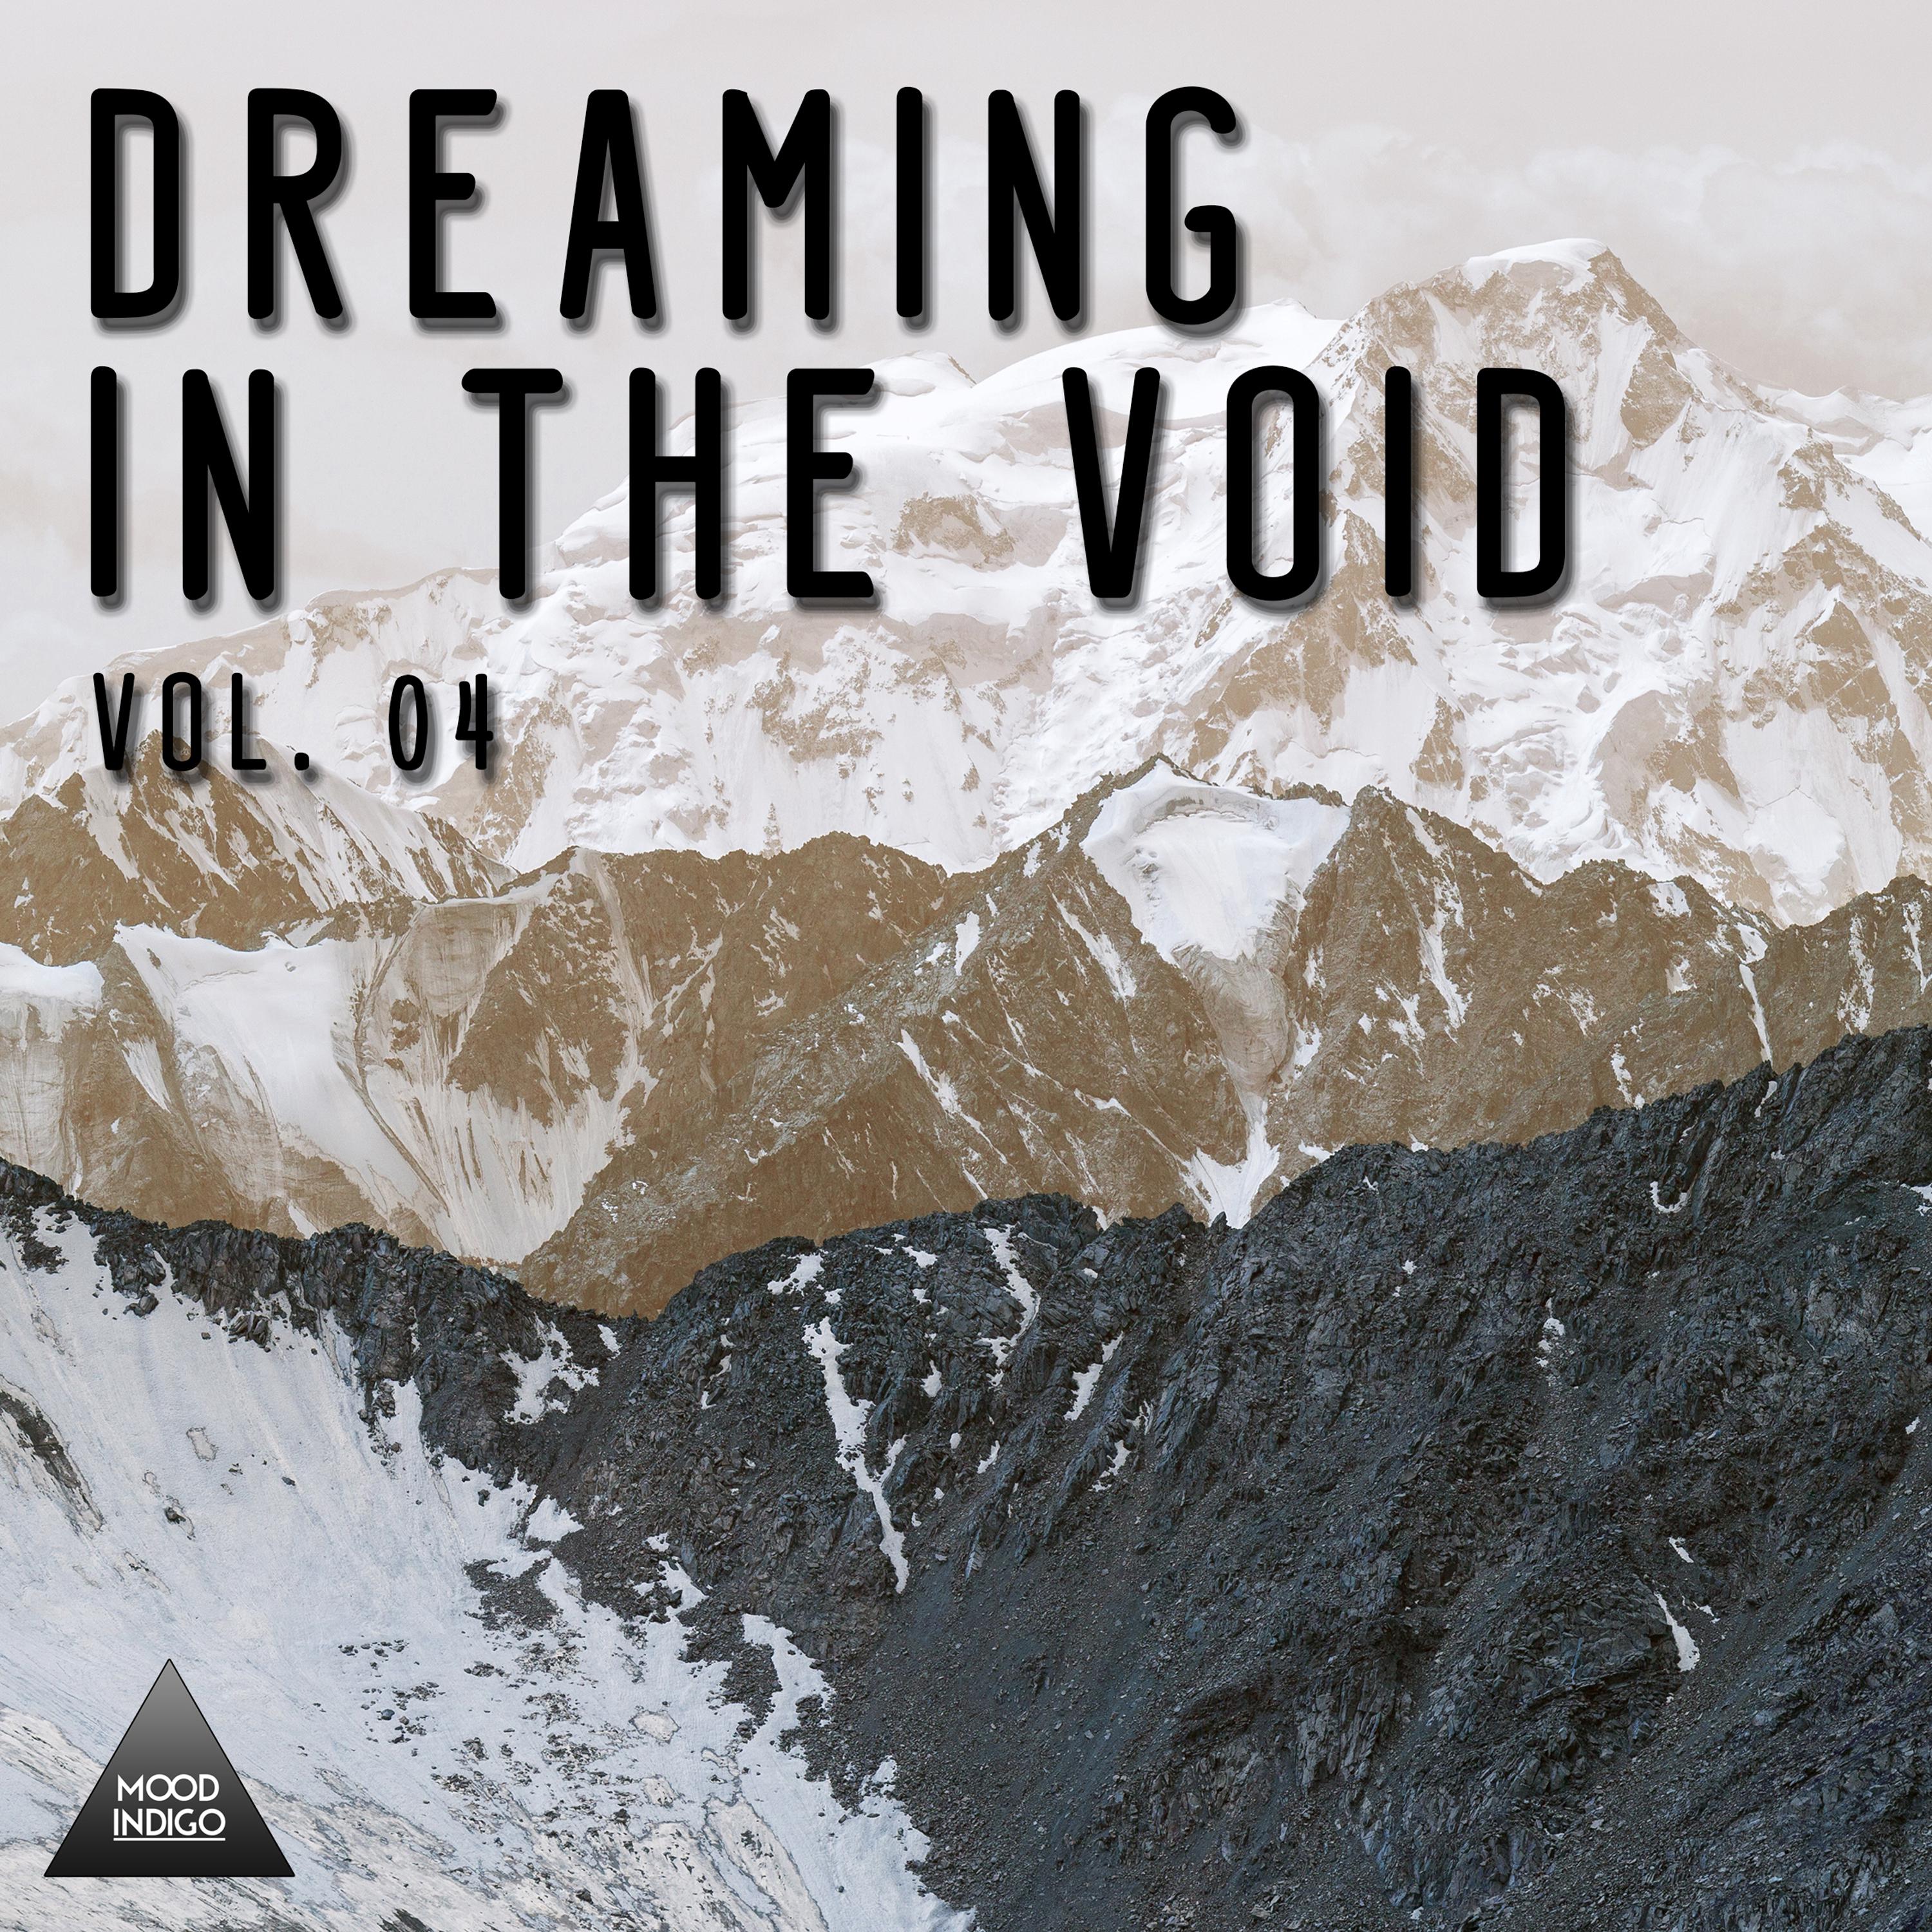 Dreaming in the Void, Vol. 04